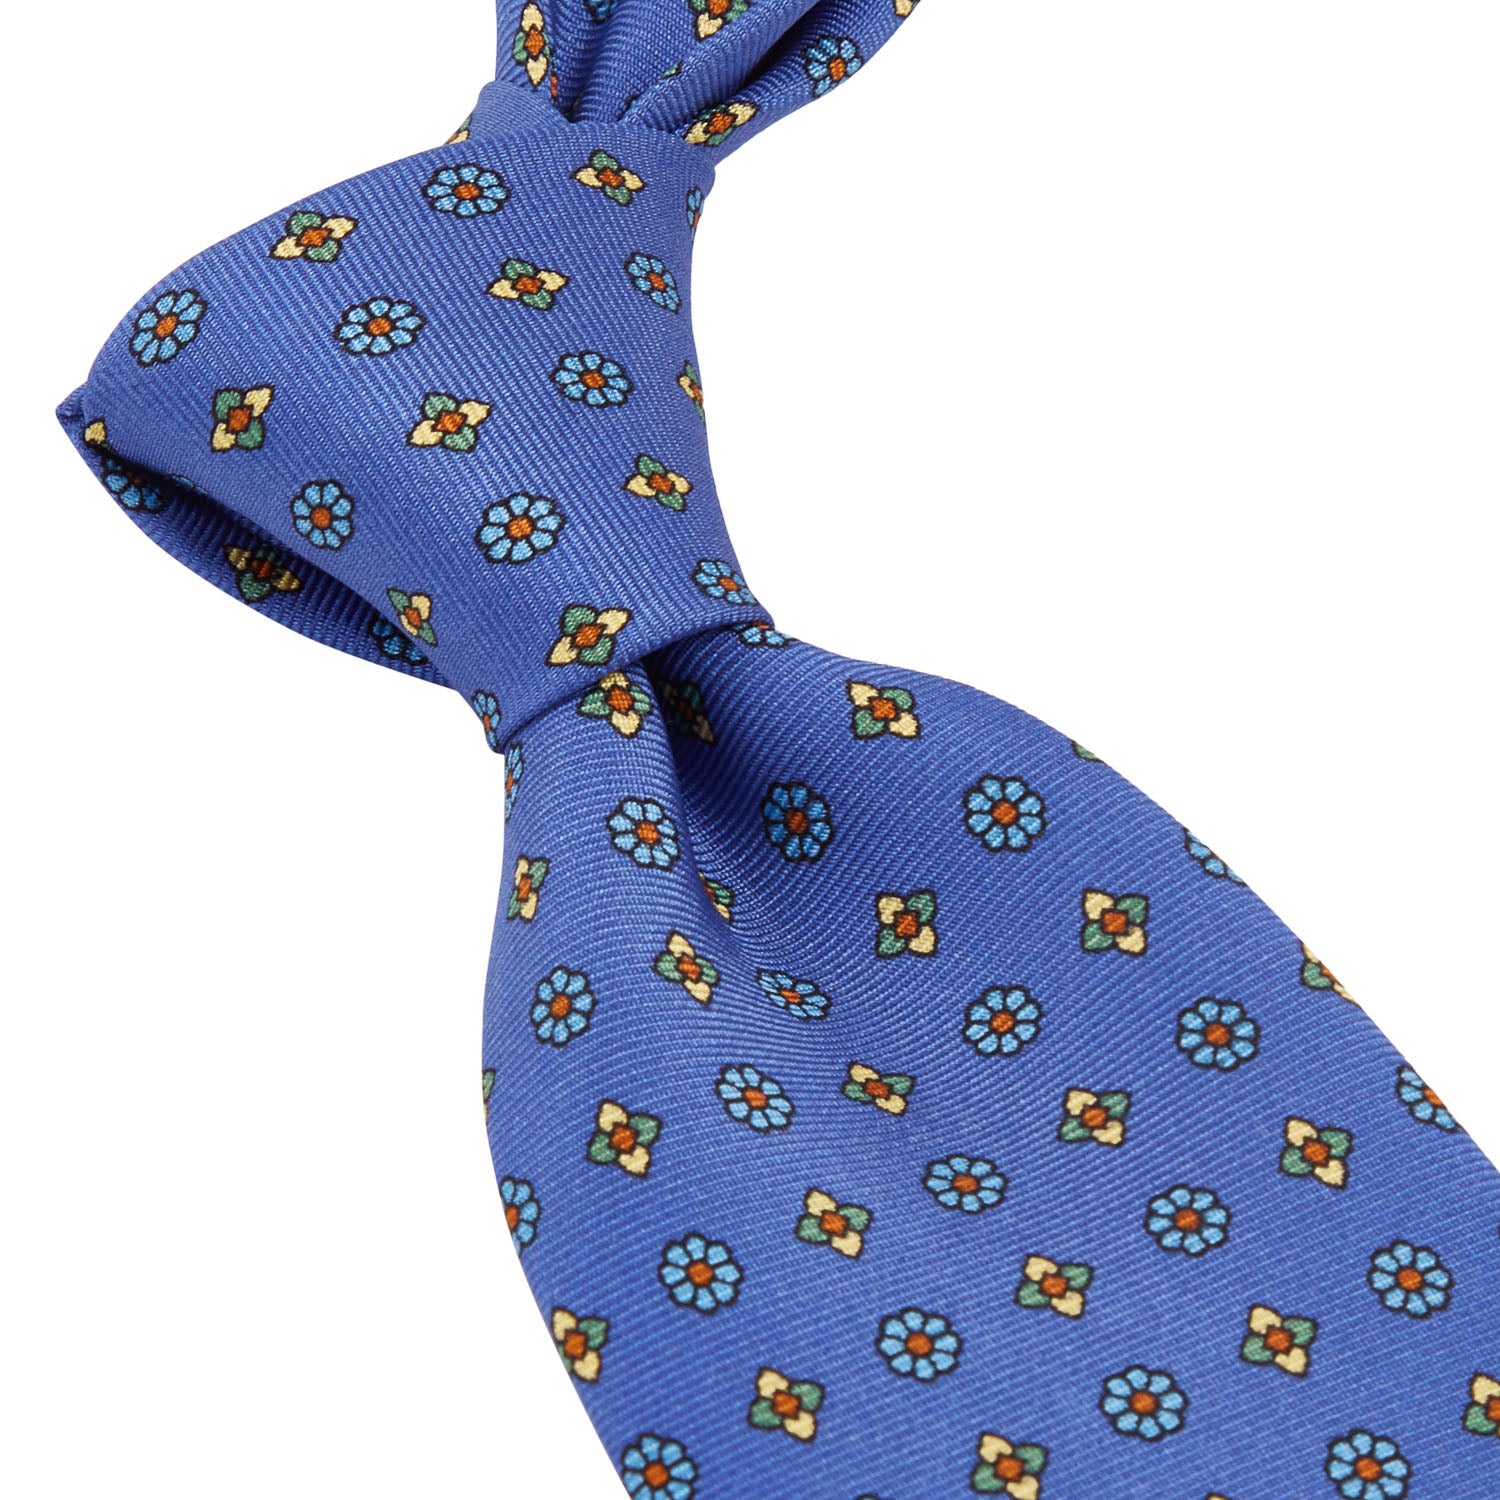 A Sovereign Grade Lido Blue Floral Printed Silk Tie from KirbyAllison.com, handmade in the United Kingdom.